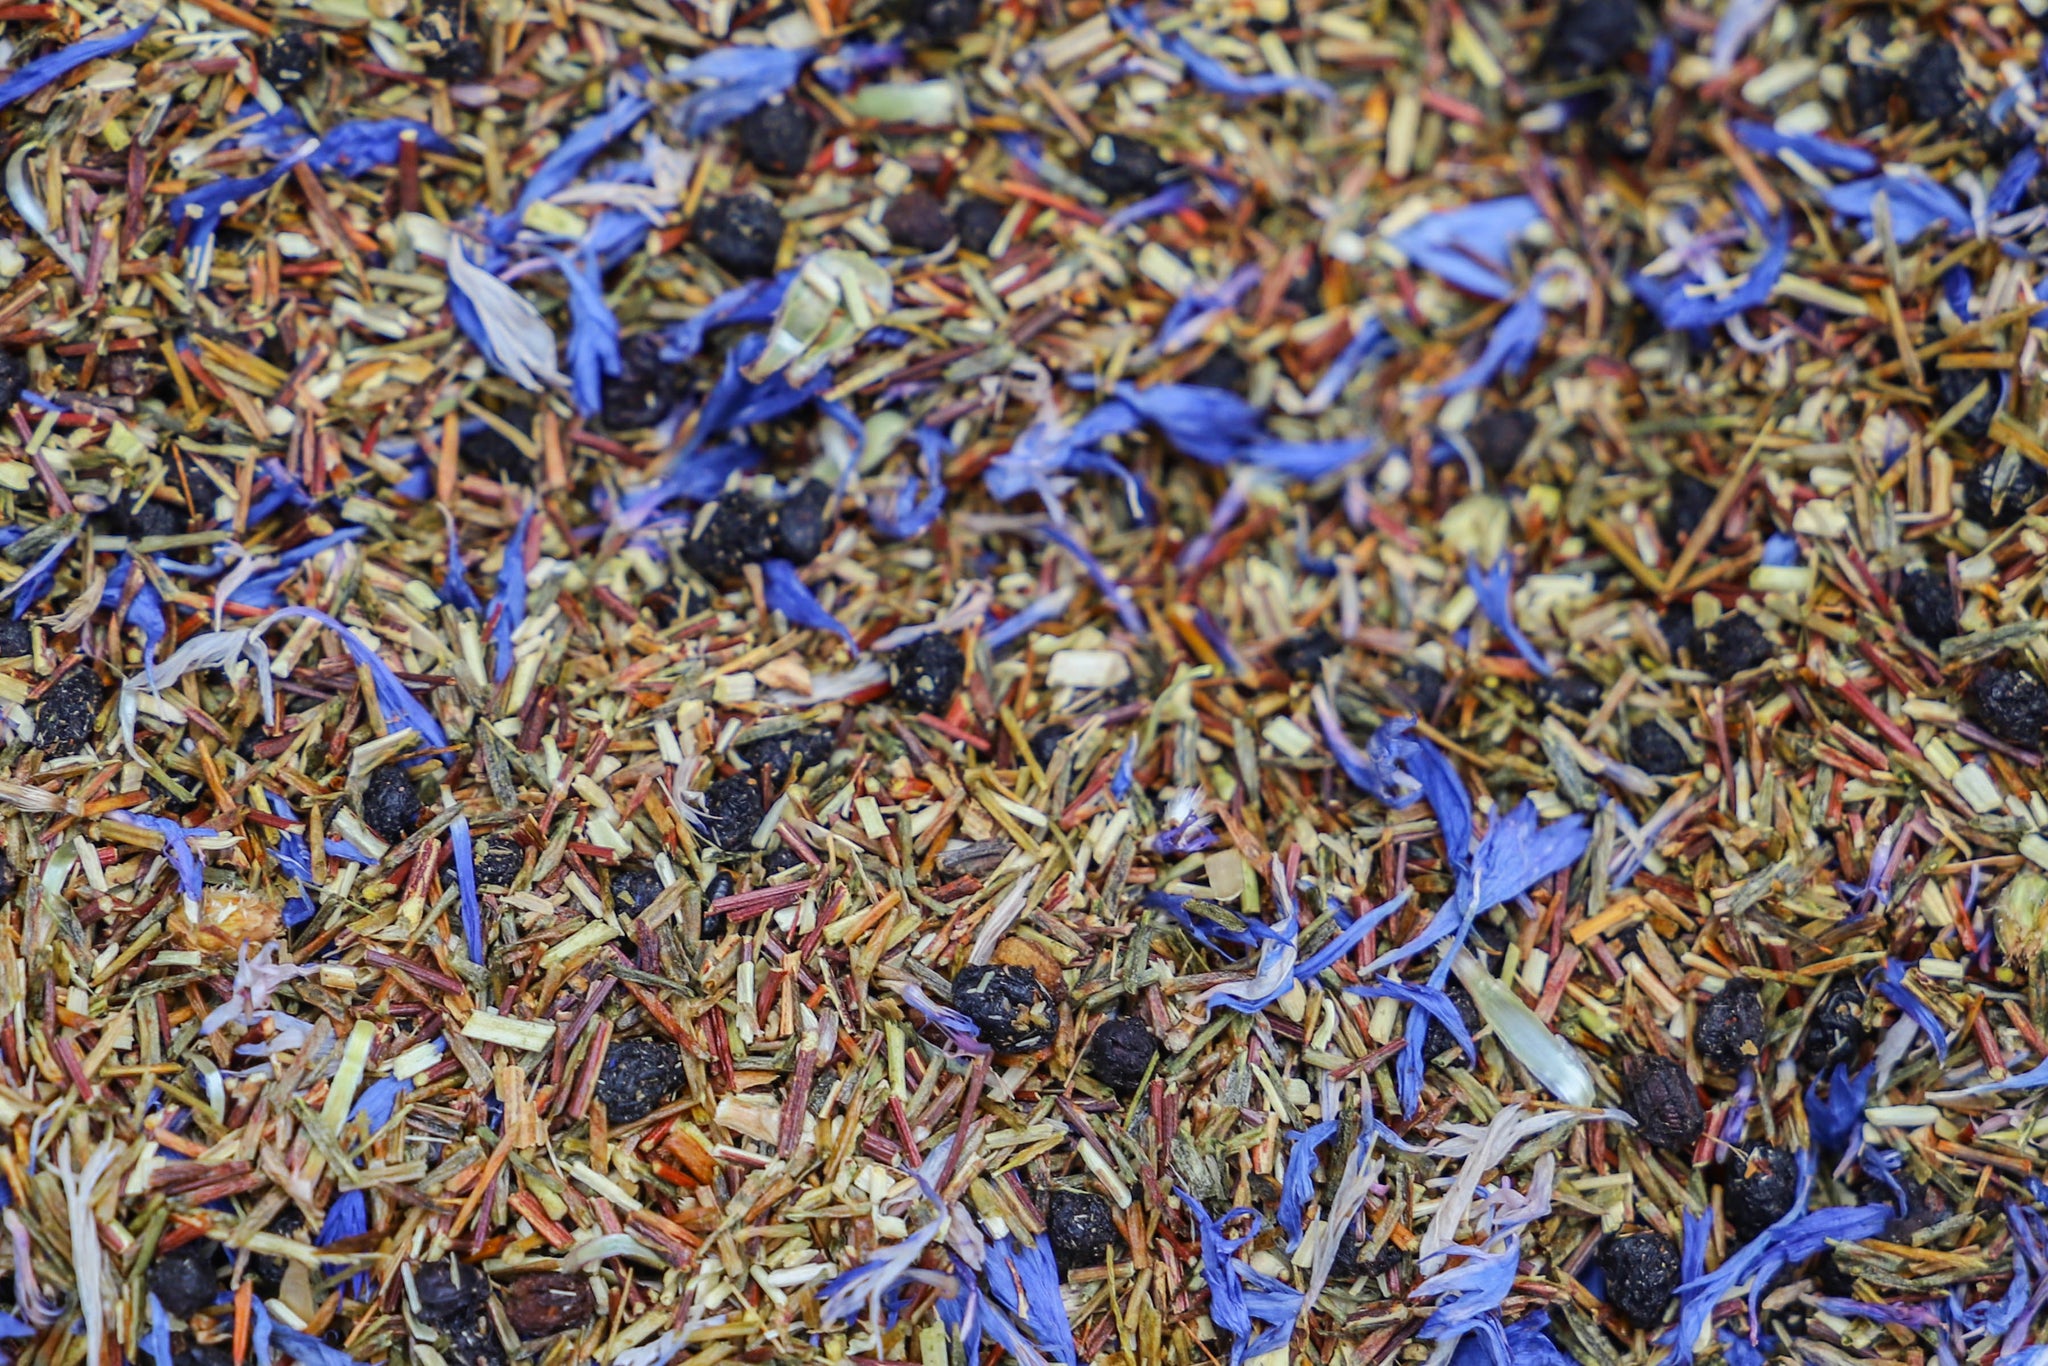 "Azriel" - Blueberry Muffin Herbal Tea - A Court of Mist and Fury inspired